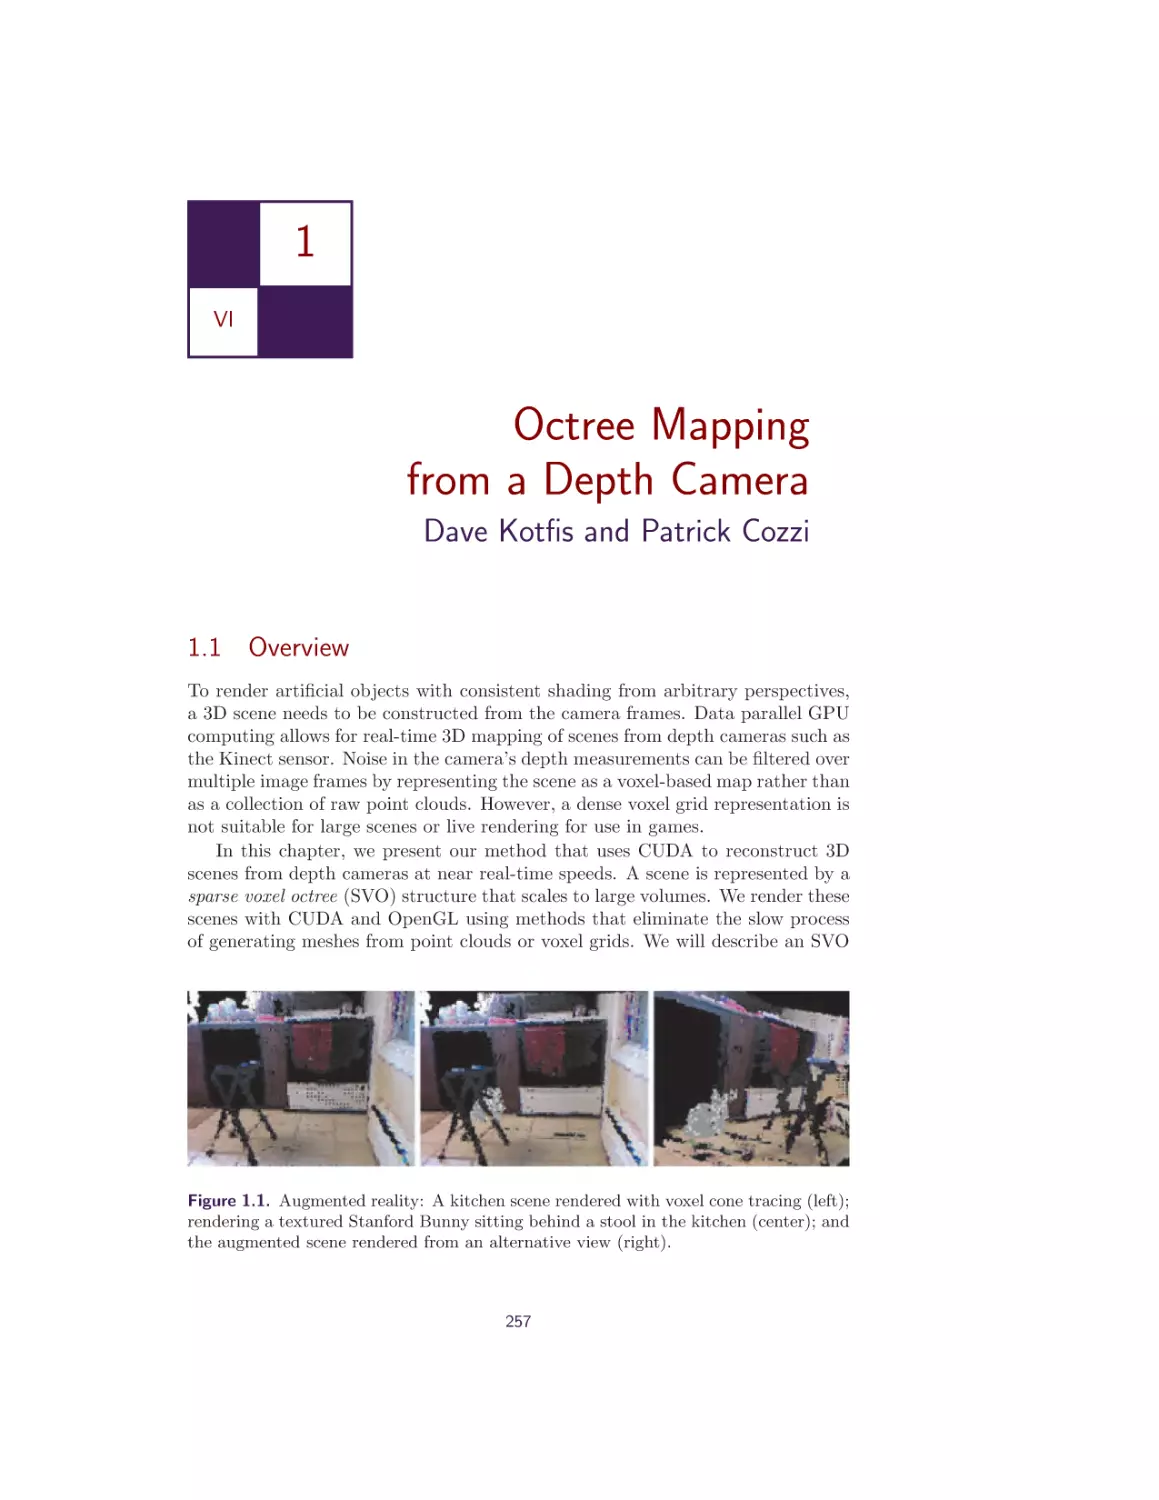 1. Octree Mapping from a Depth Camera